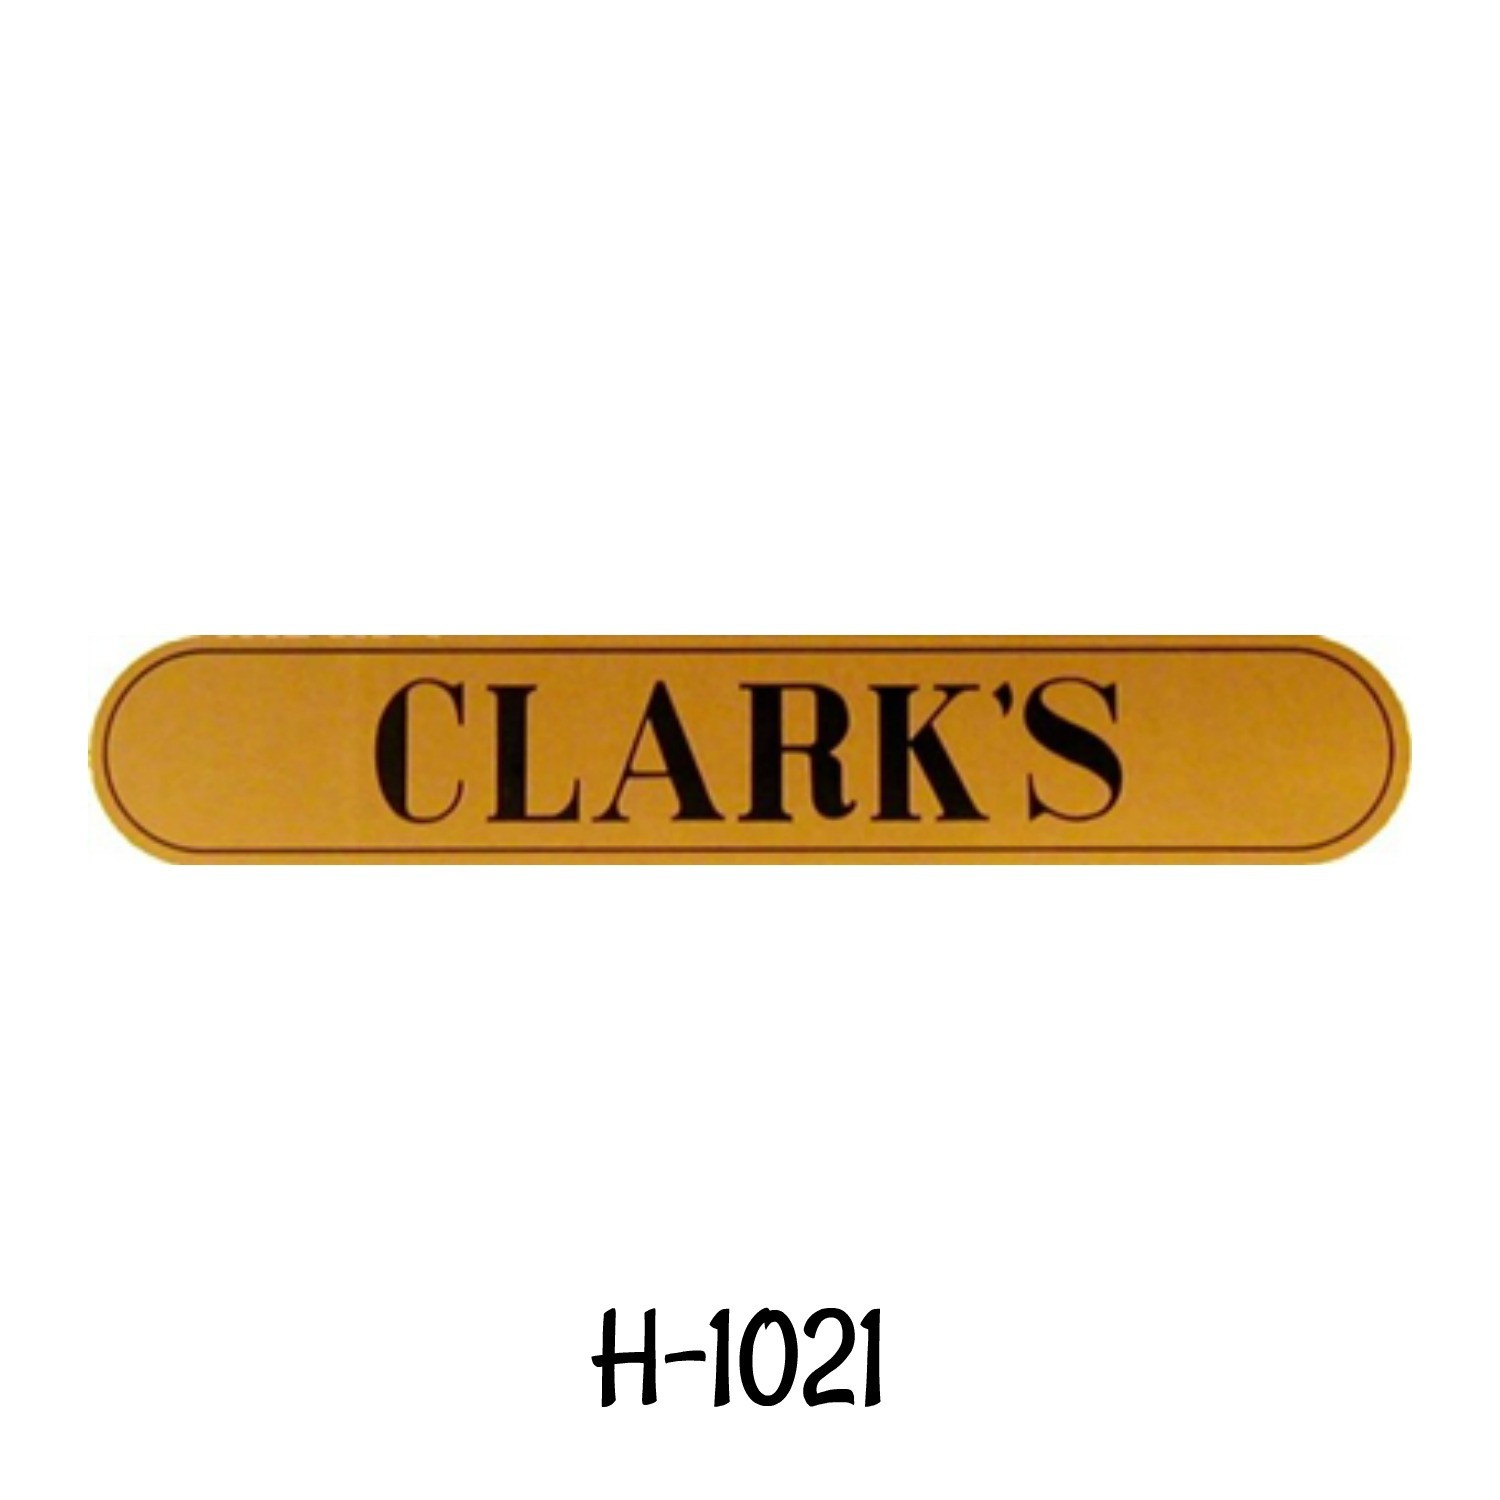 10 1/4 long 1 5/8 tall ClARKS SPOOL CABINET DECALS 4 PIECE SET Black on Gold 